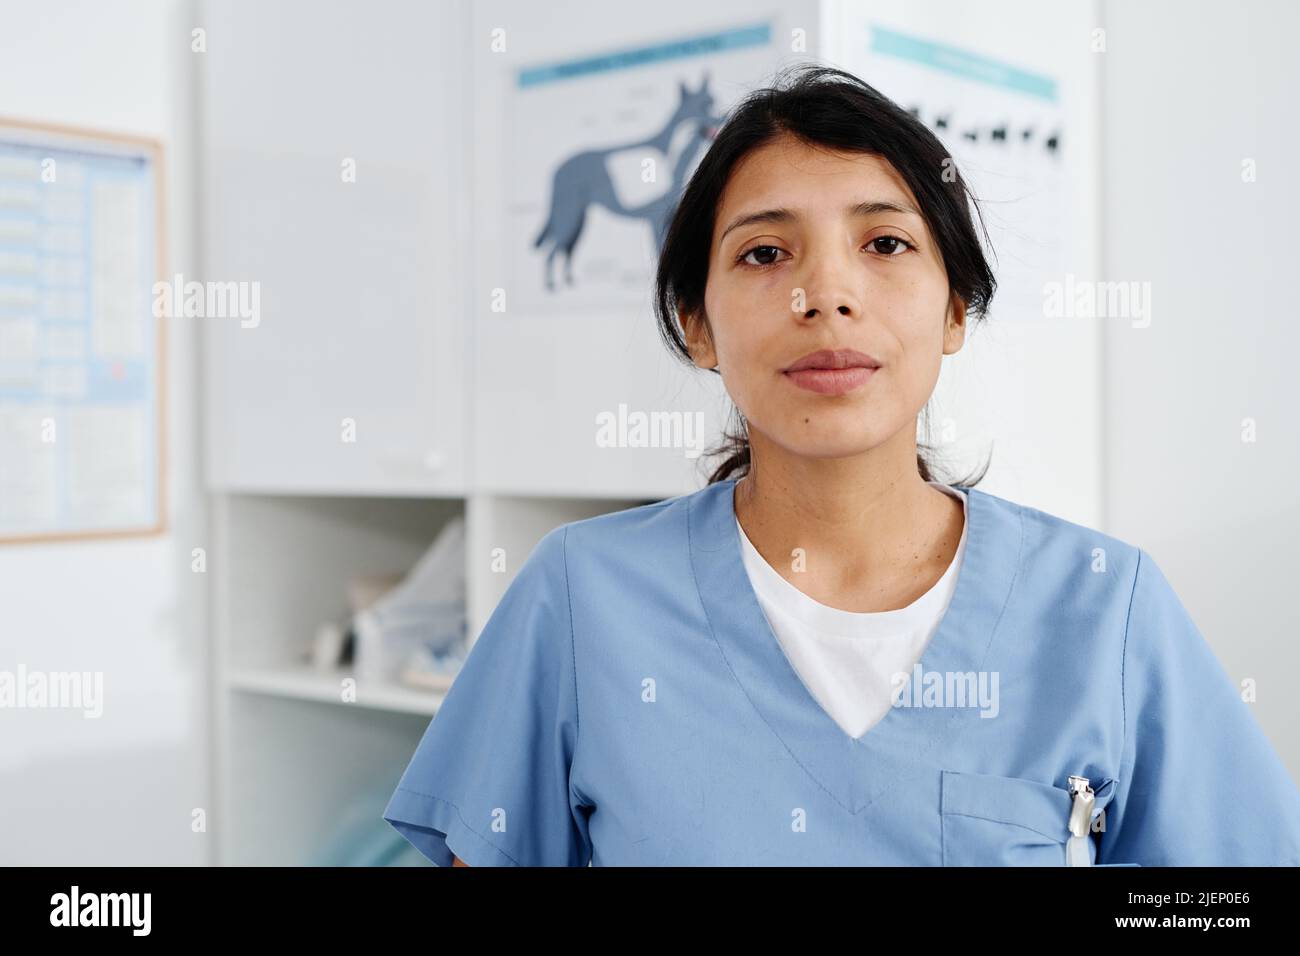 Medium close-up portrait of young adult Hispanic woman working in vet clinic standing in exam room looking at camera Stock Photo